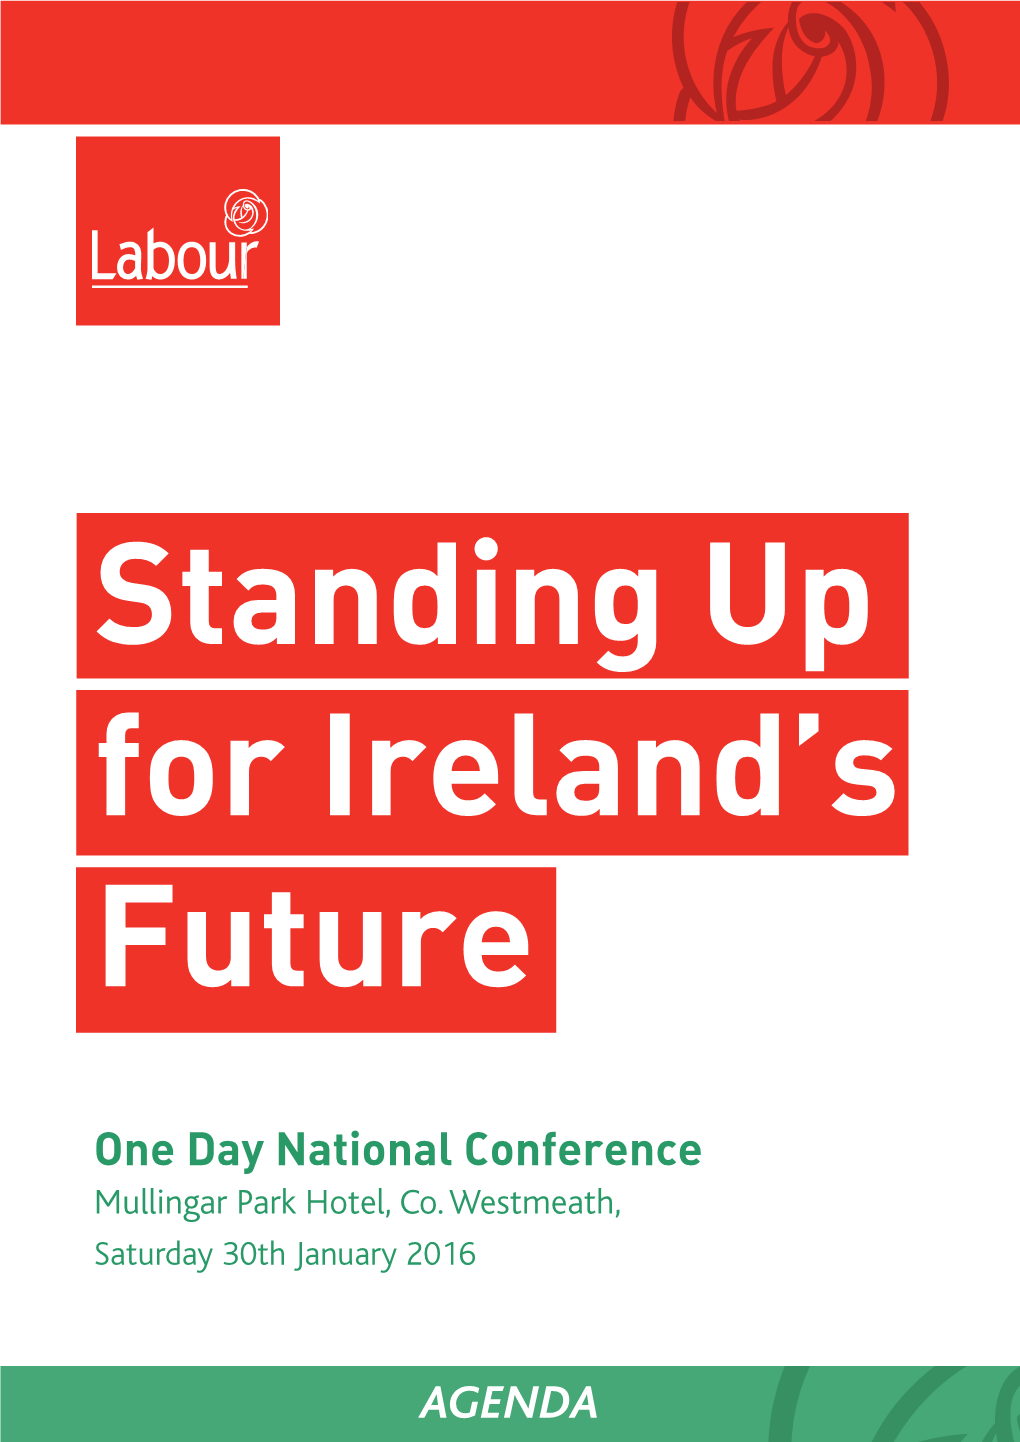 Agenda One Day National Labour Conference One Day National Labour Conference